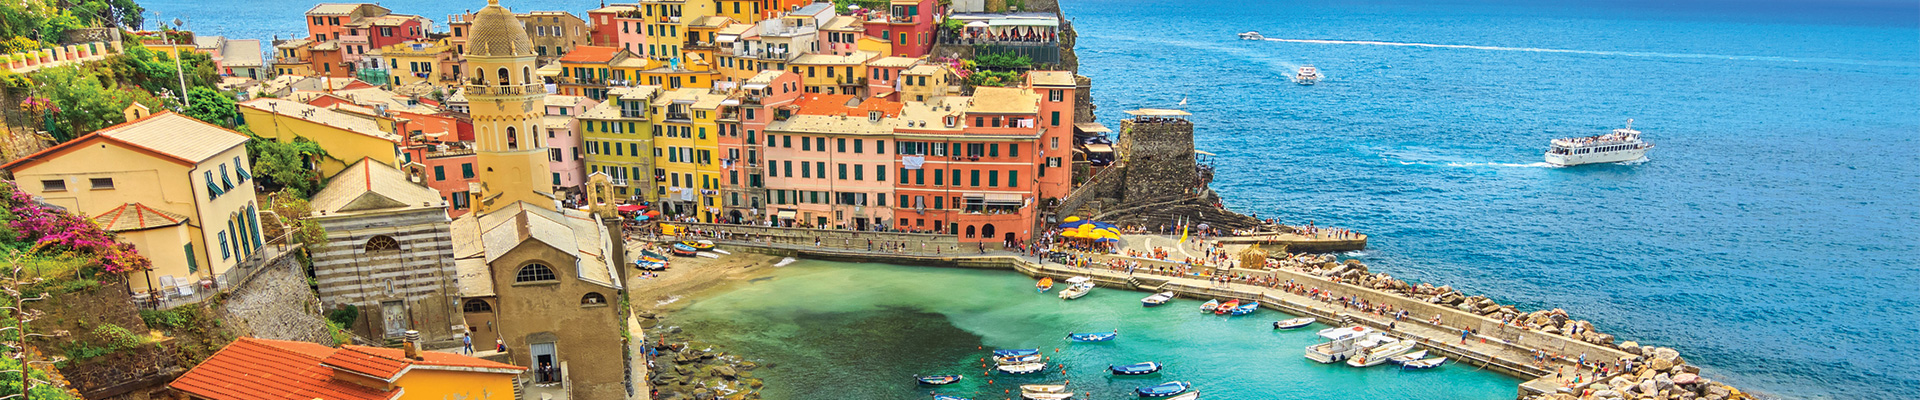 3* The Art Cities of Italy by Rail - Italy Package (6 Nights)